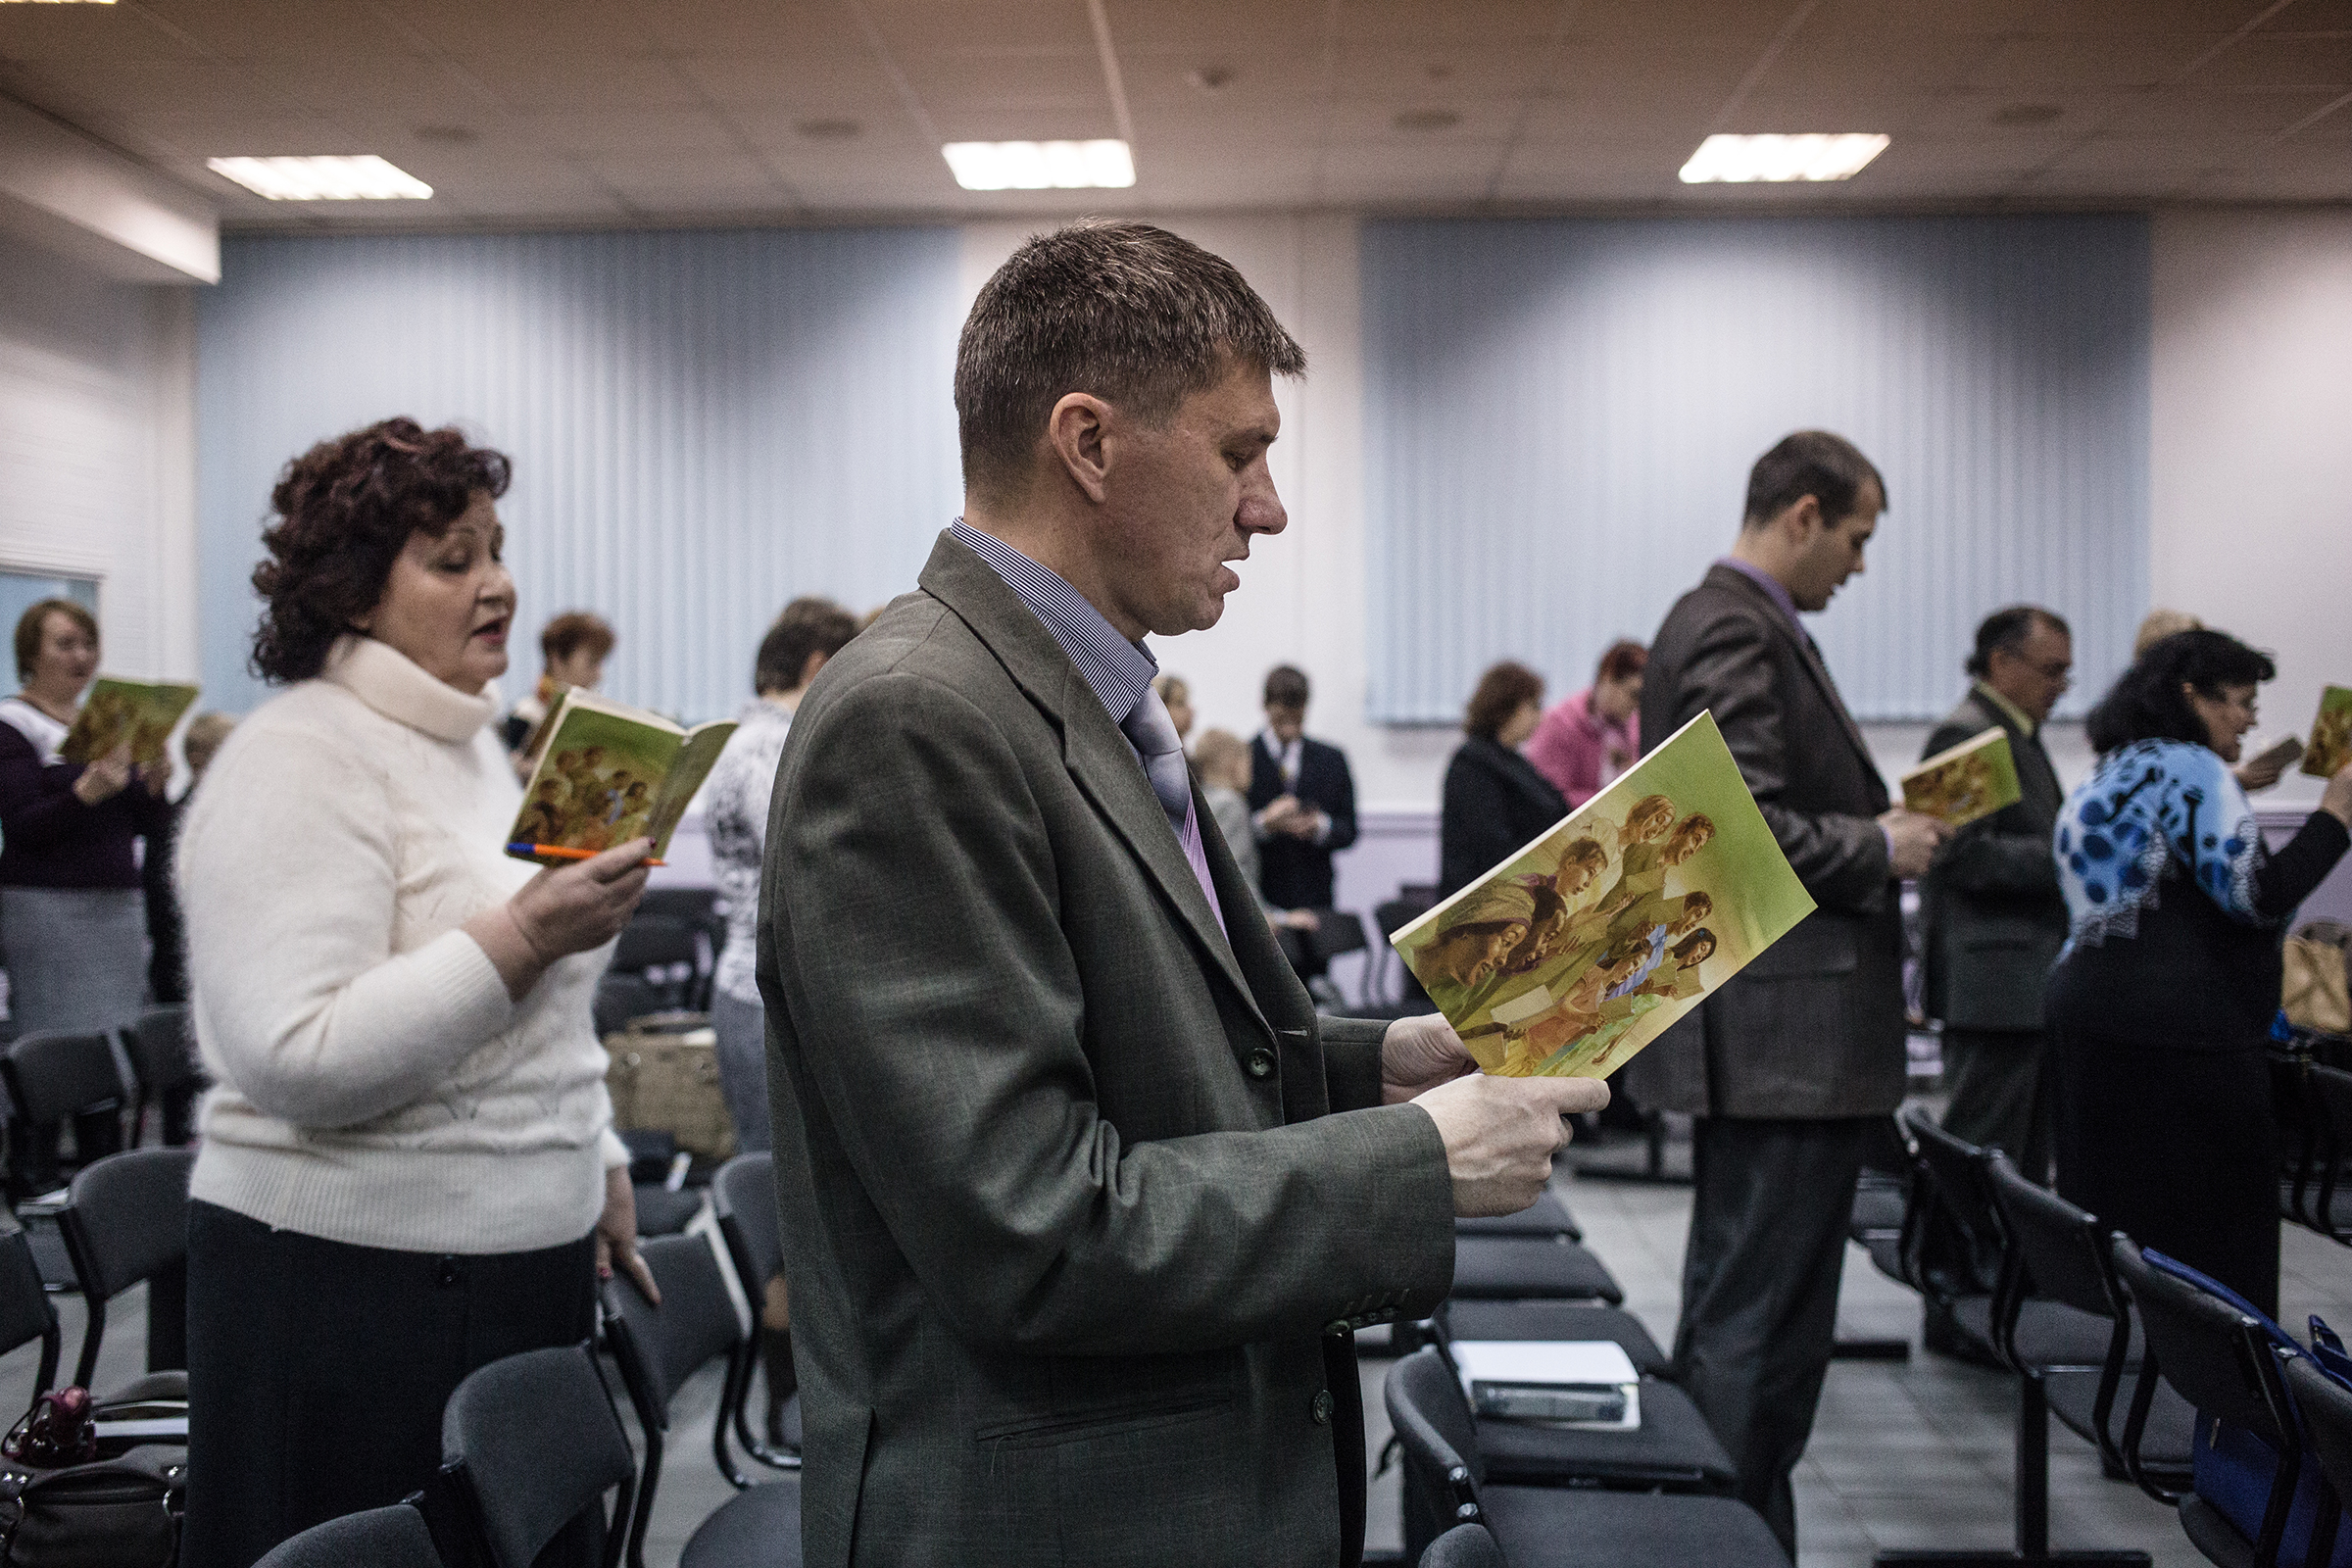 Jehovah's Witnesses Trial, Taganrog, Russia